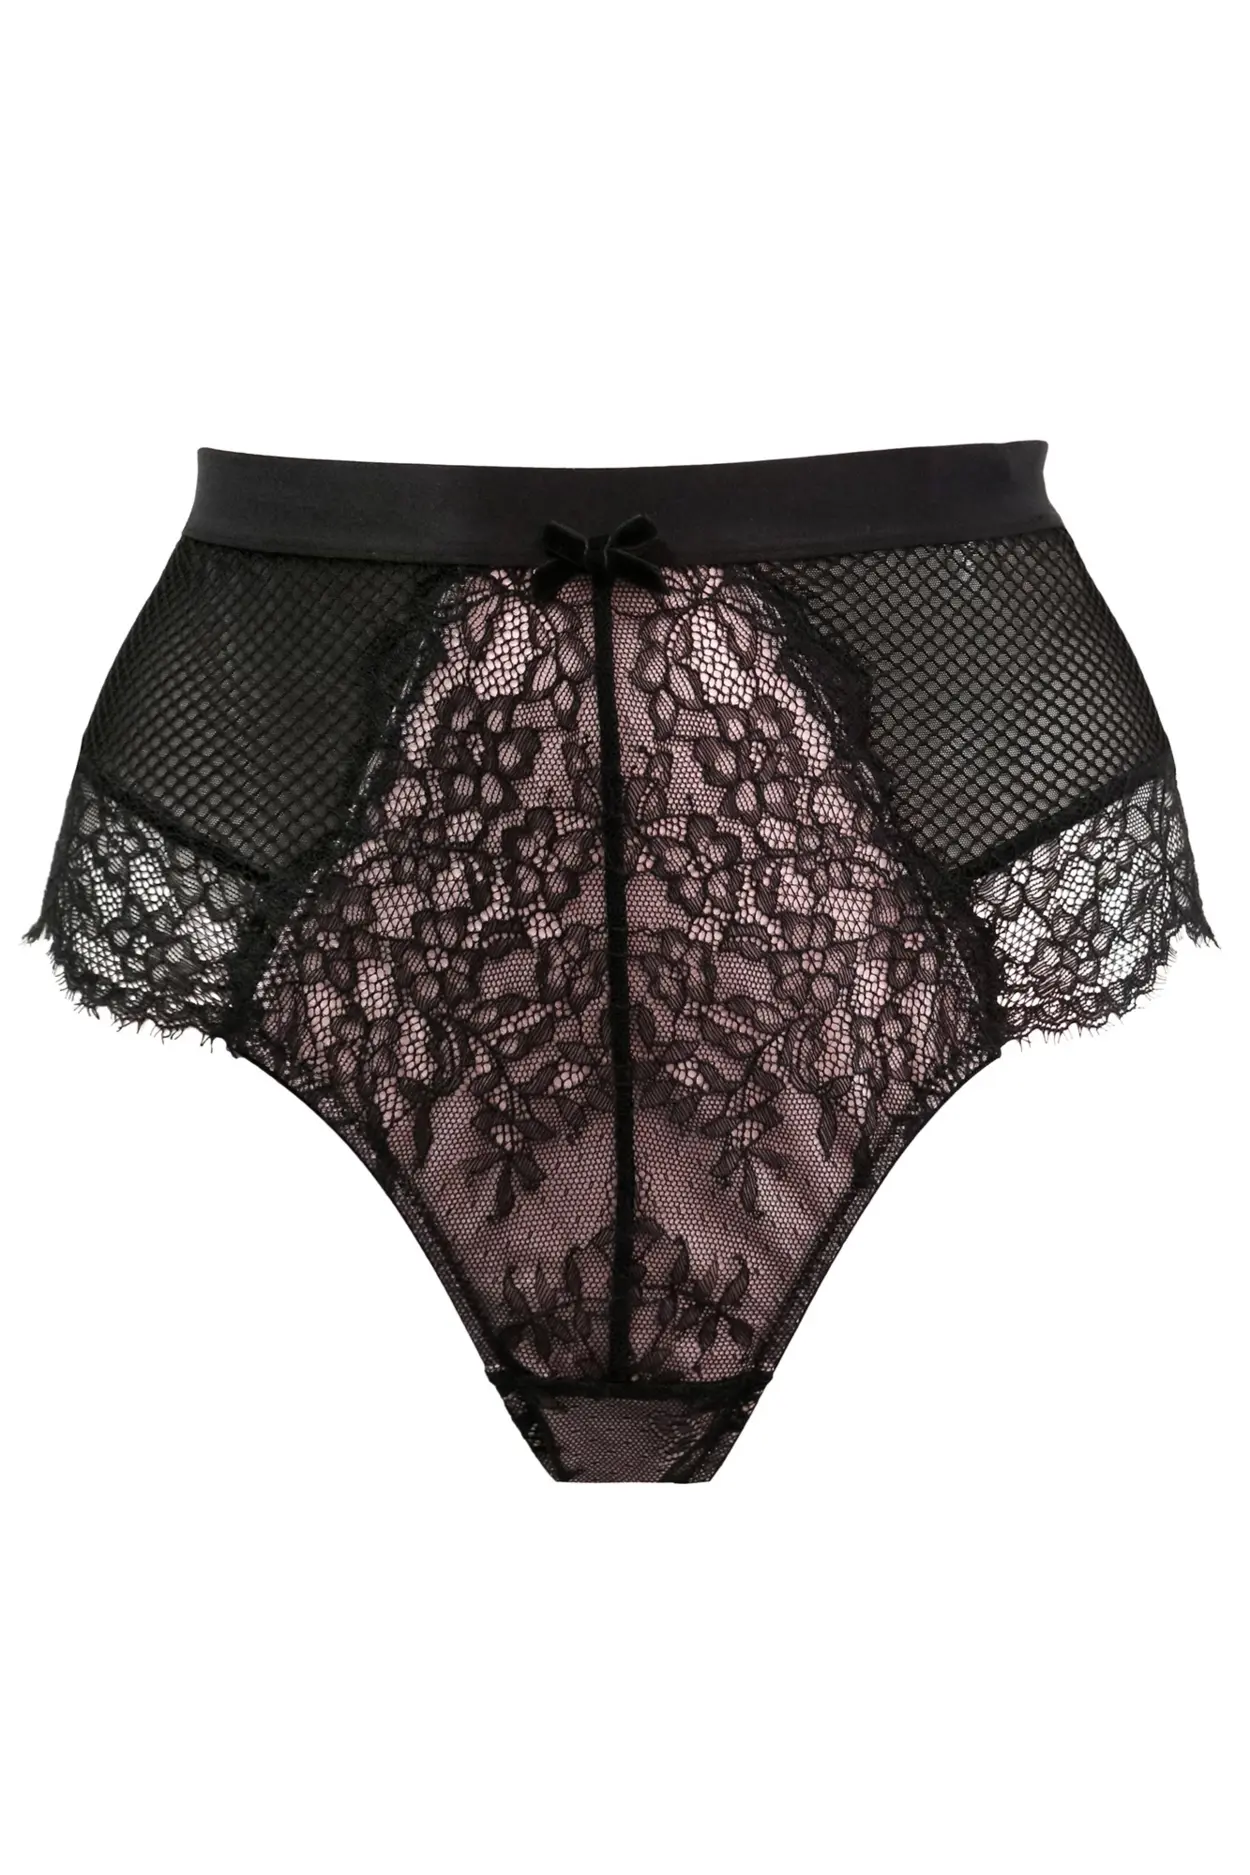 Dark Romance Deep Lace Up Brief in Black/Pink | Pour Moi Clothing